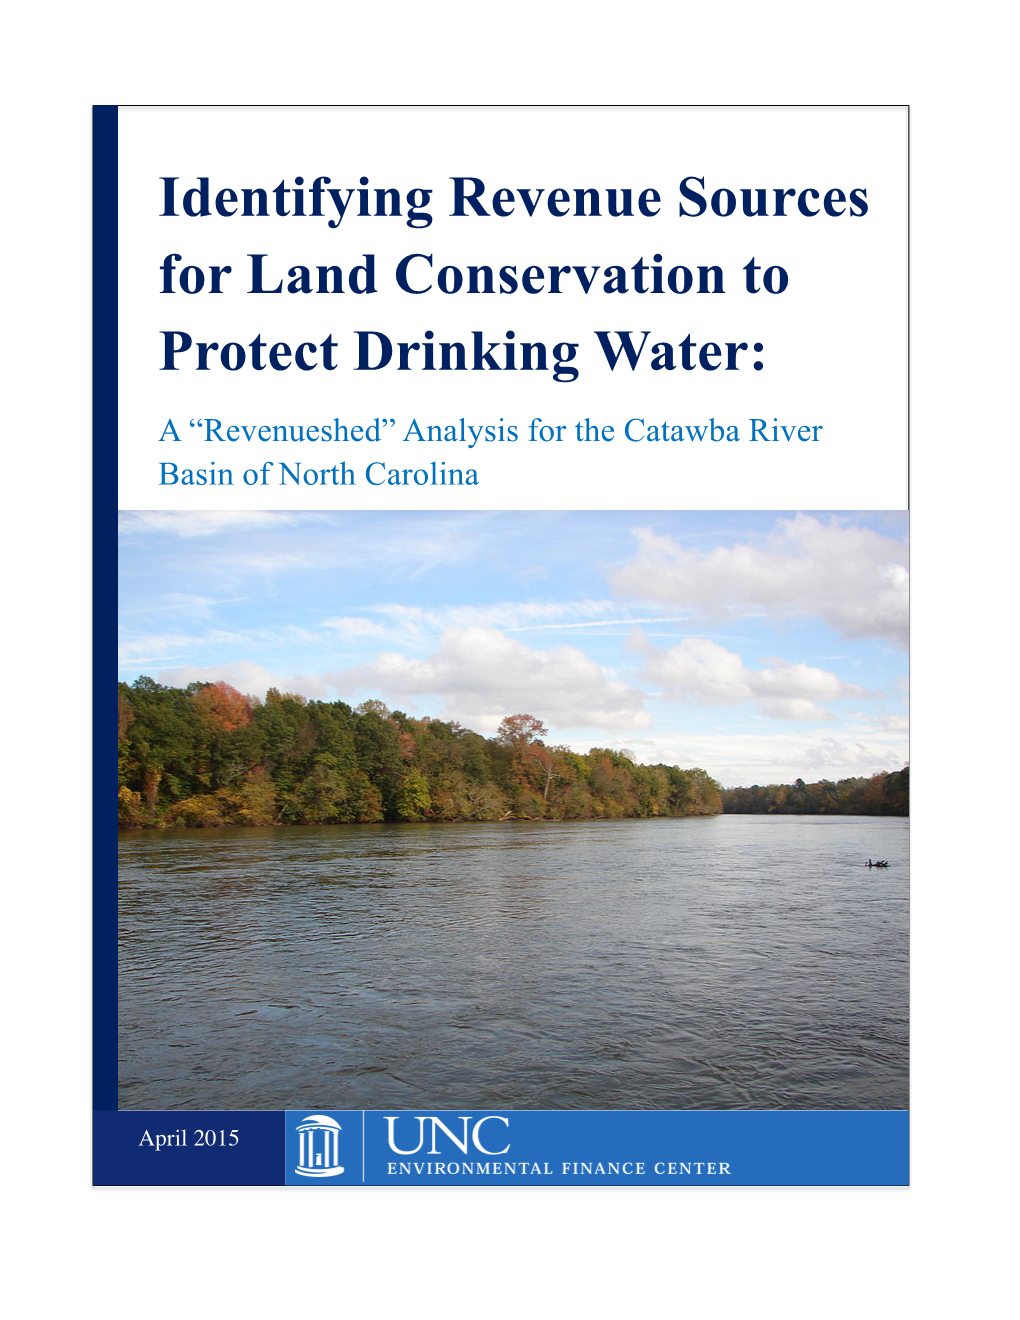 Identifying Revenue Sources for Land Conservation to Protect Drinking Water: a “Revenueshed” Analysis for the Catawba River Basin of North Carolina